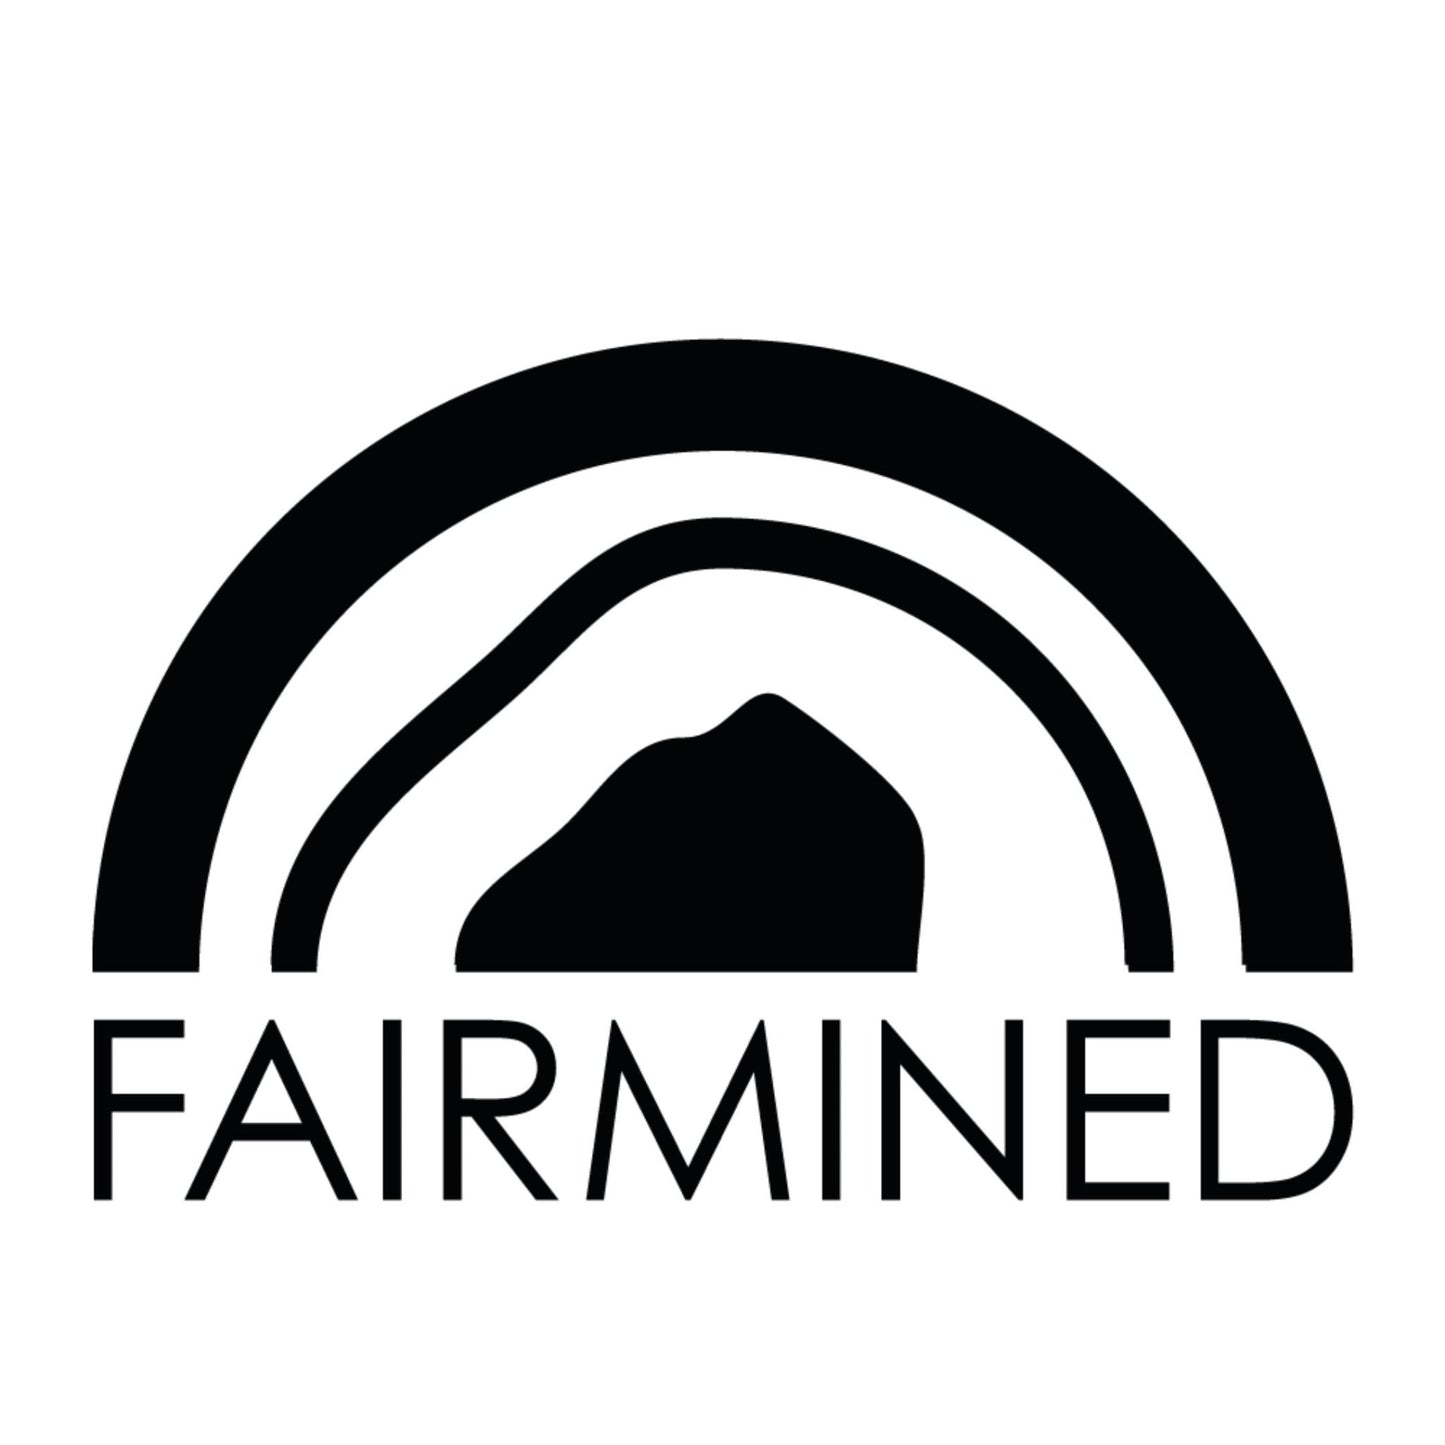 Fairmined License Number - W.R. Metalarts